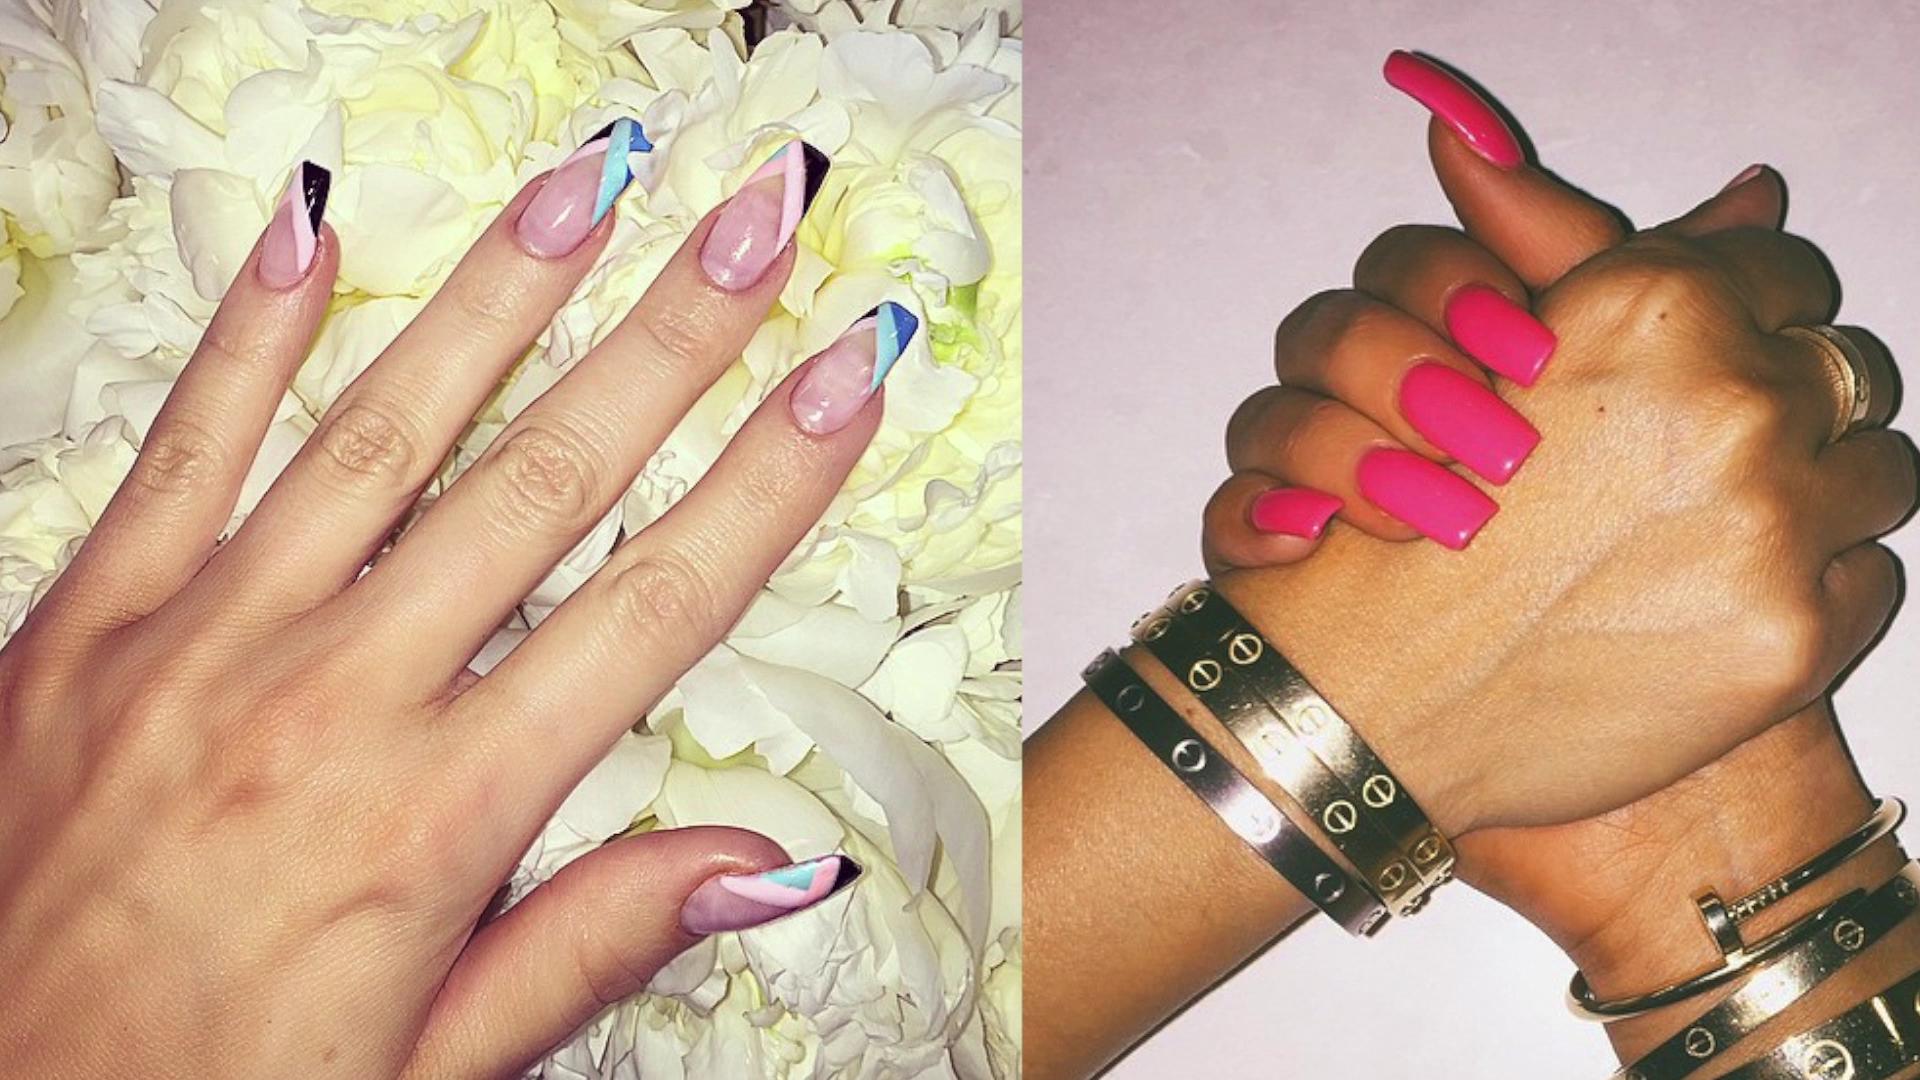 Celebrity nail trends to follow